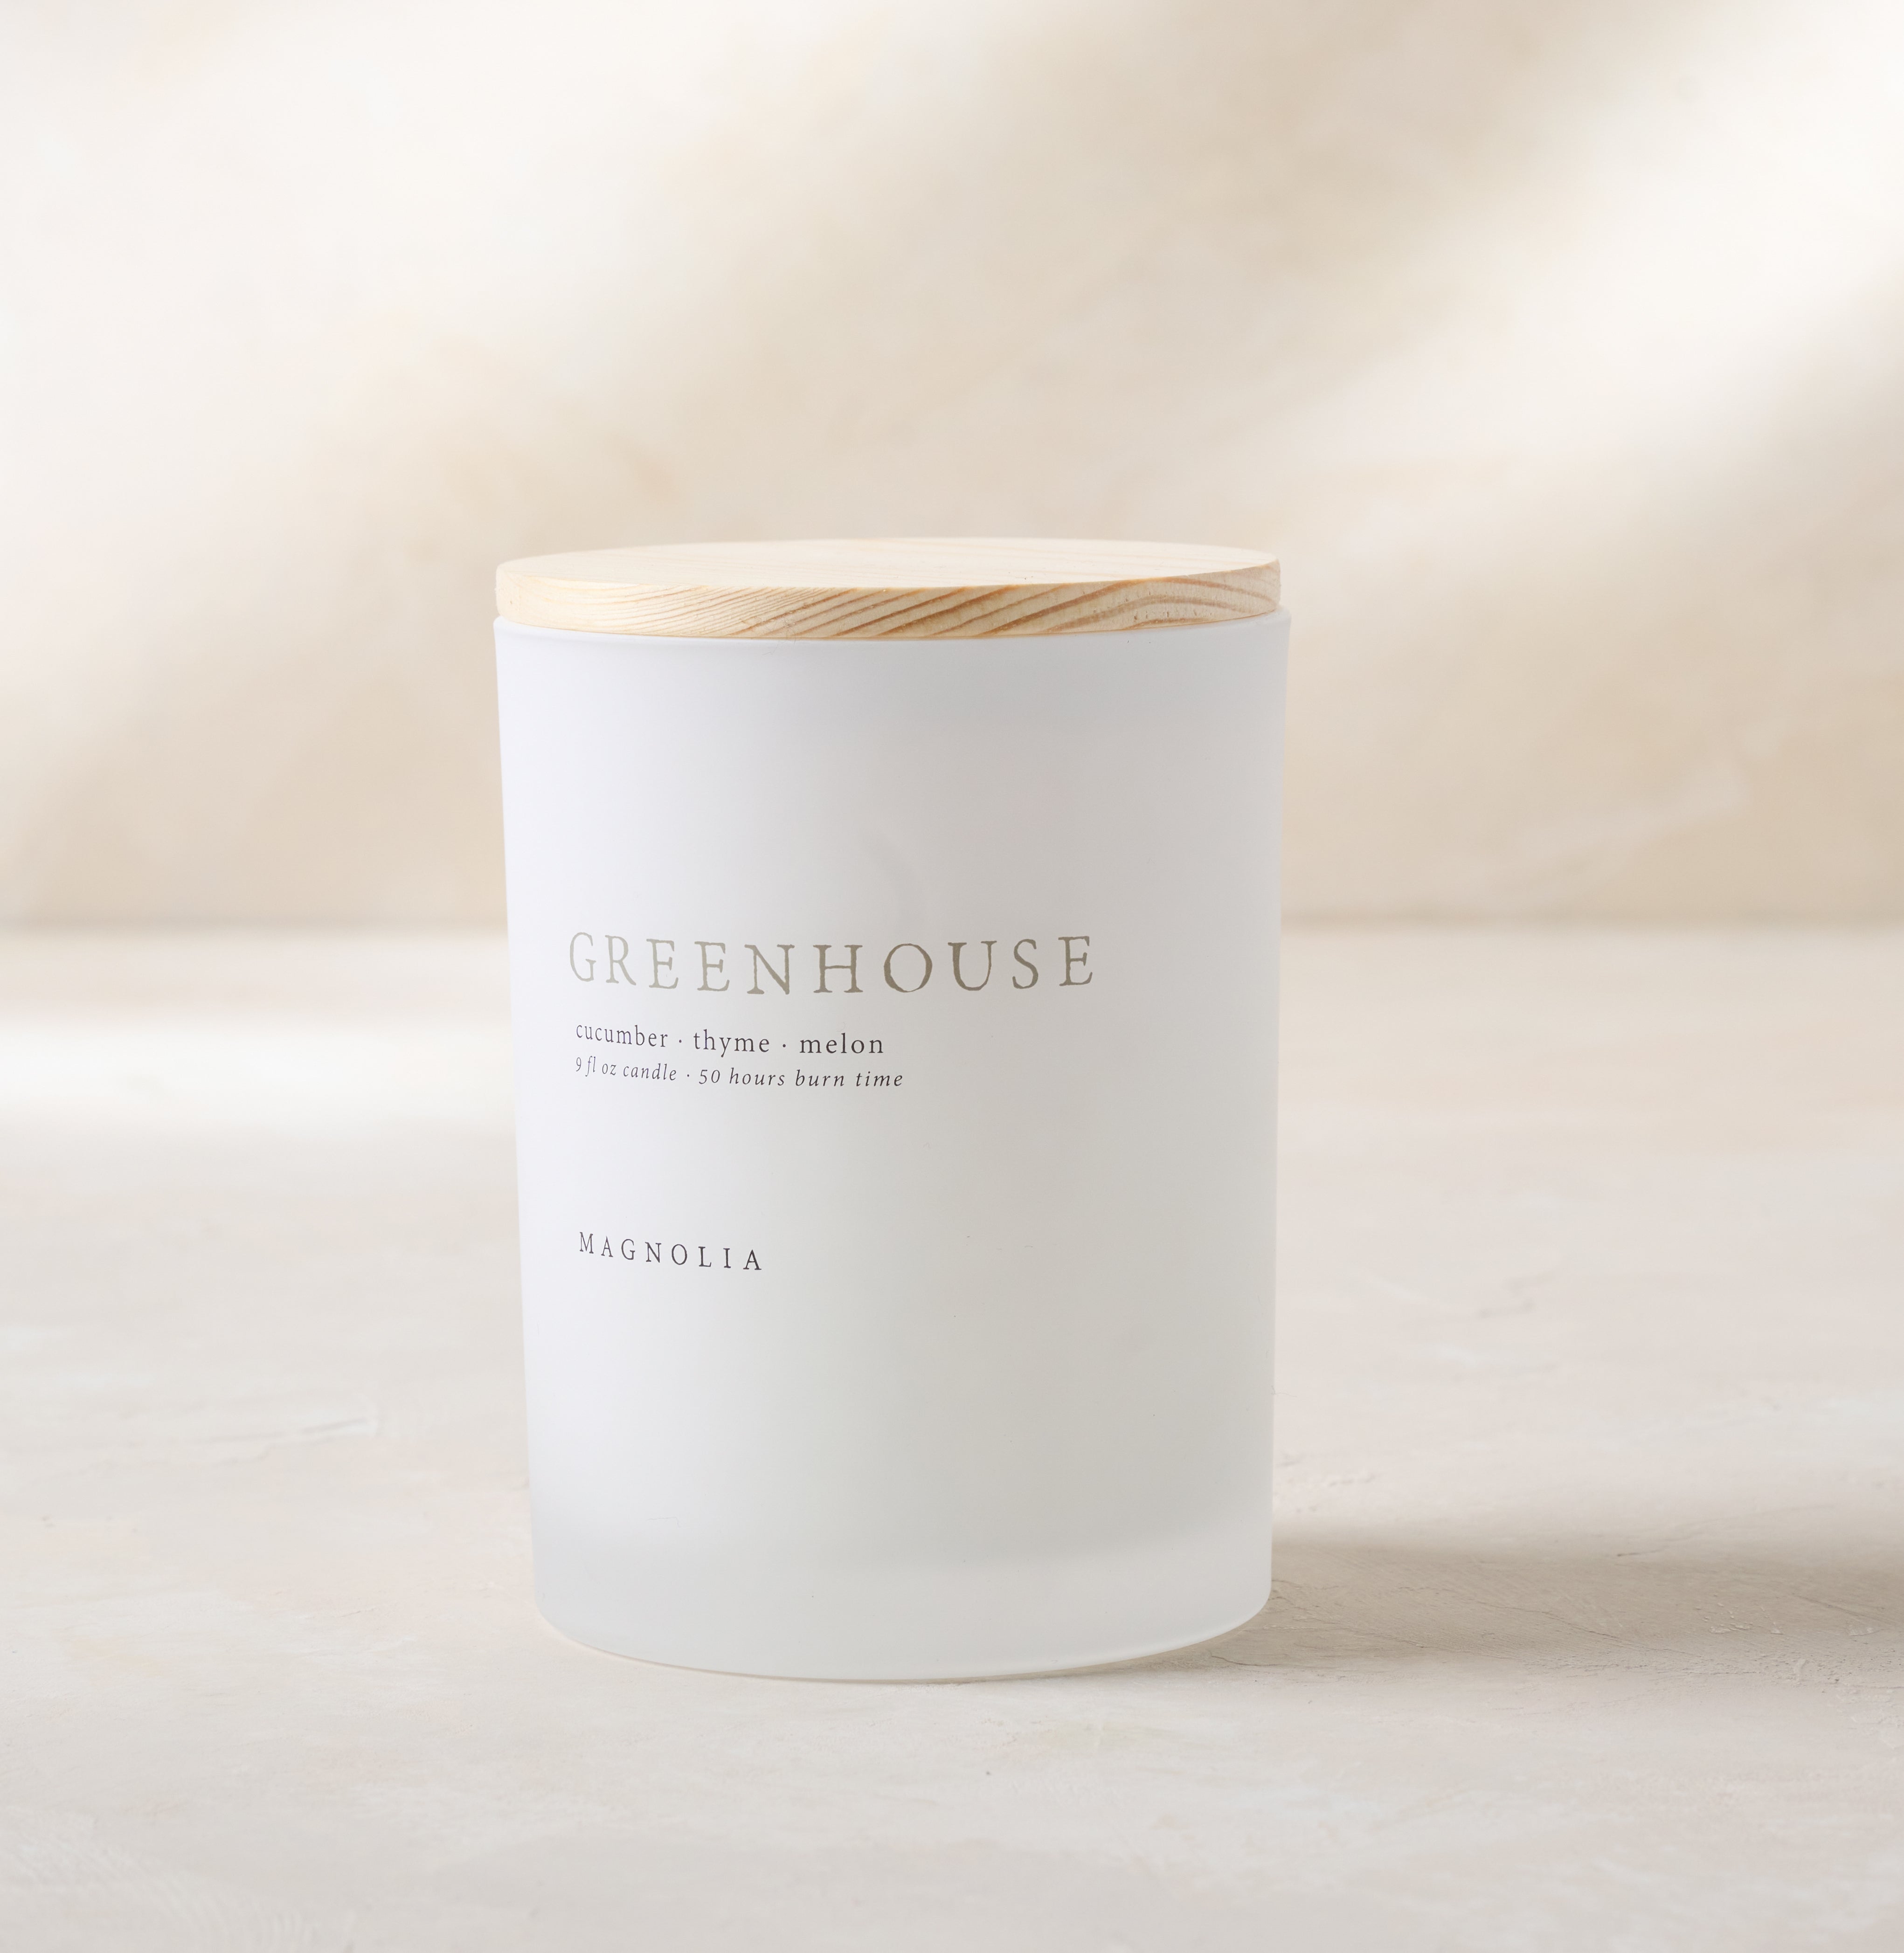 magnolia greenhouse candle with wood lid notes scents of cucumber thyme and melon$30.00